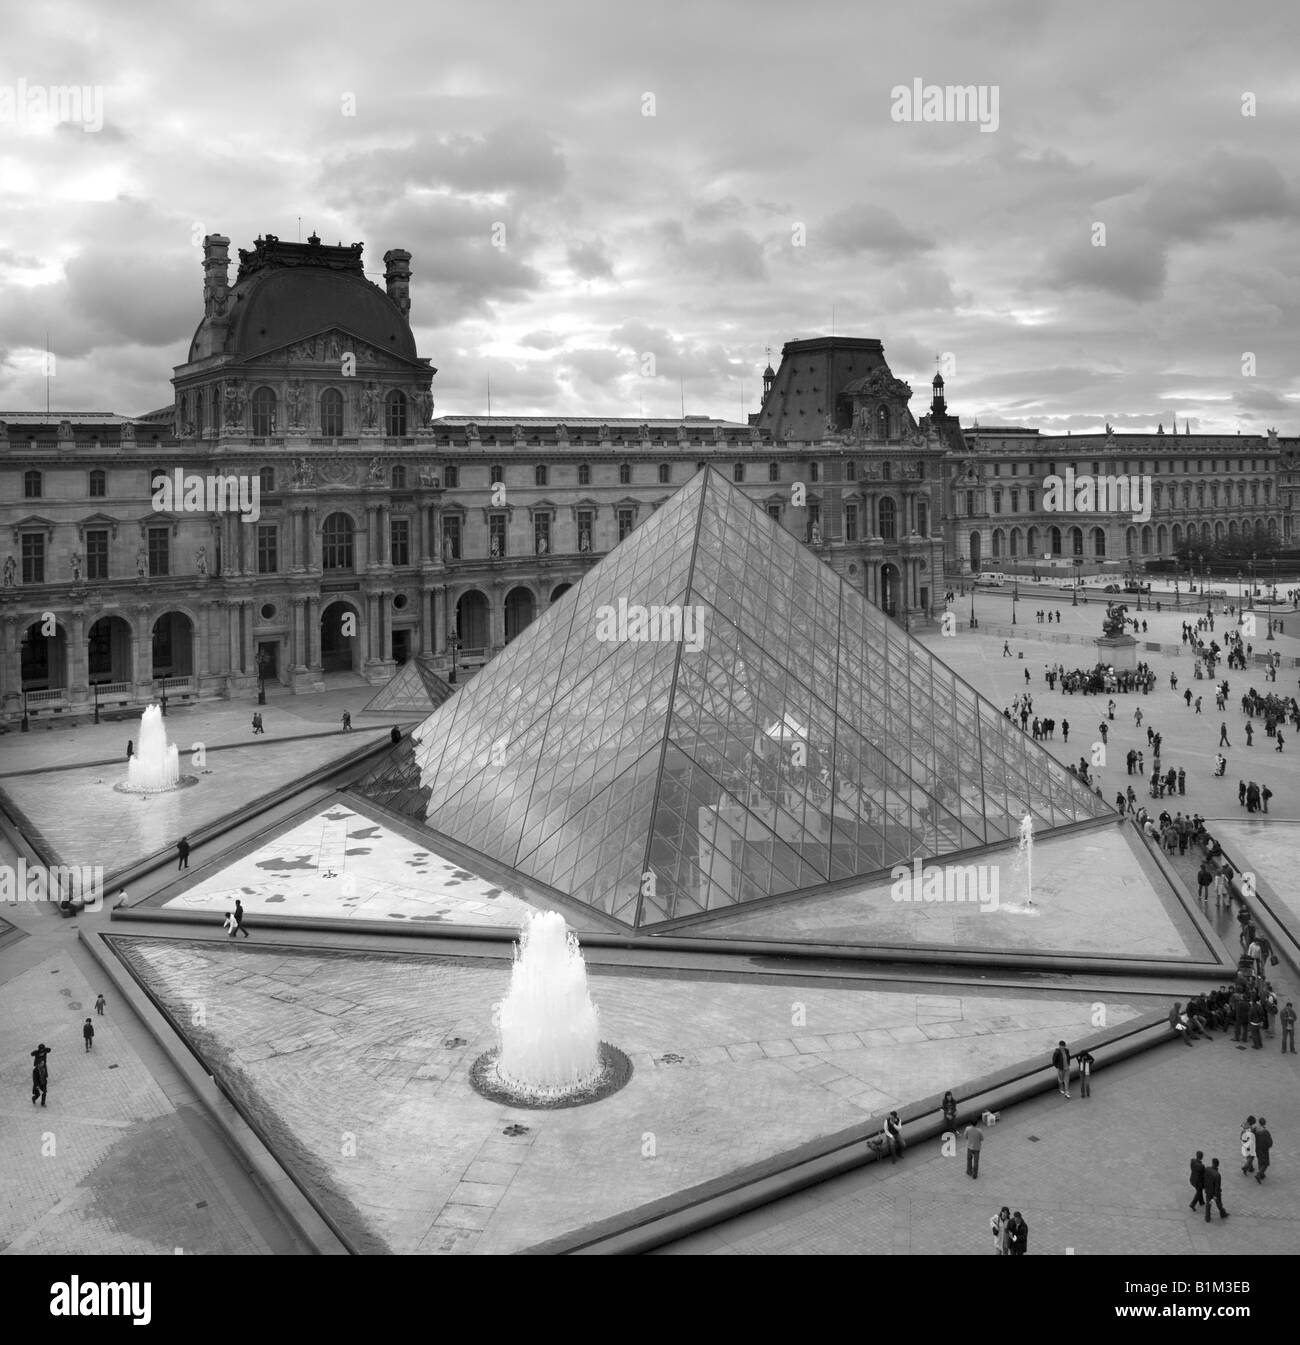 Courtyard and glass pyramid of the Louvre Museum in Paris France Stock Photo